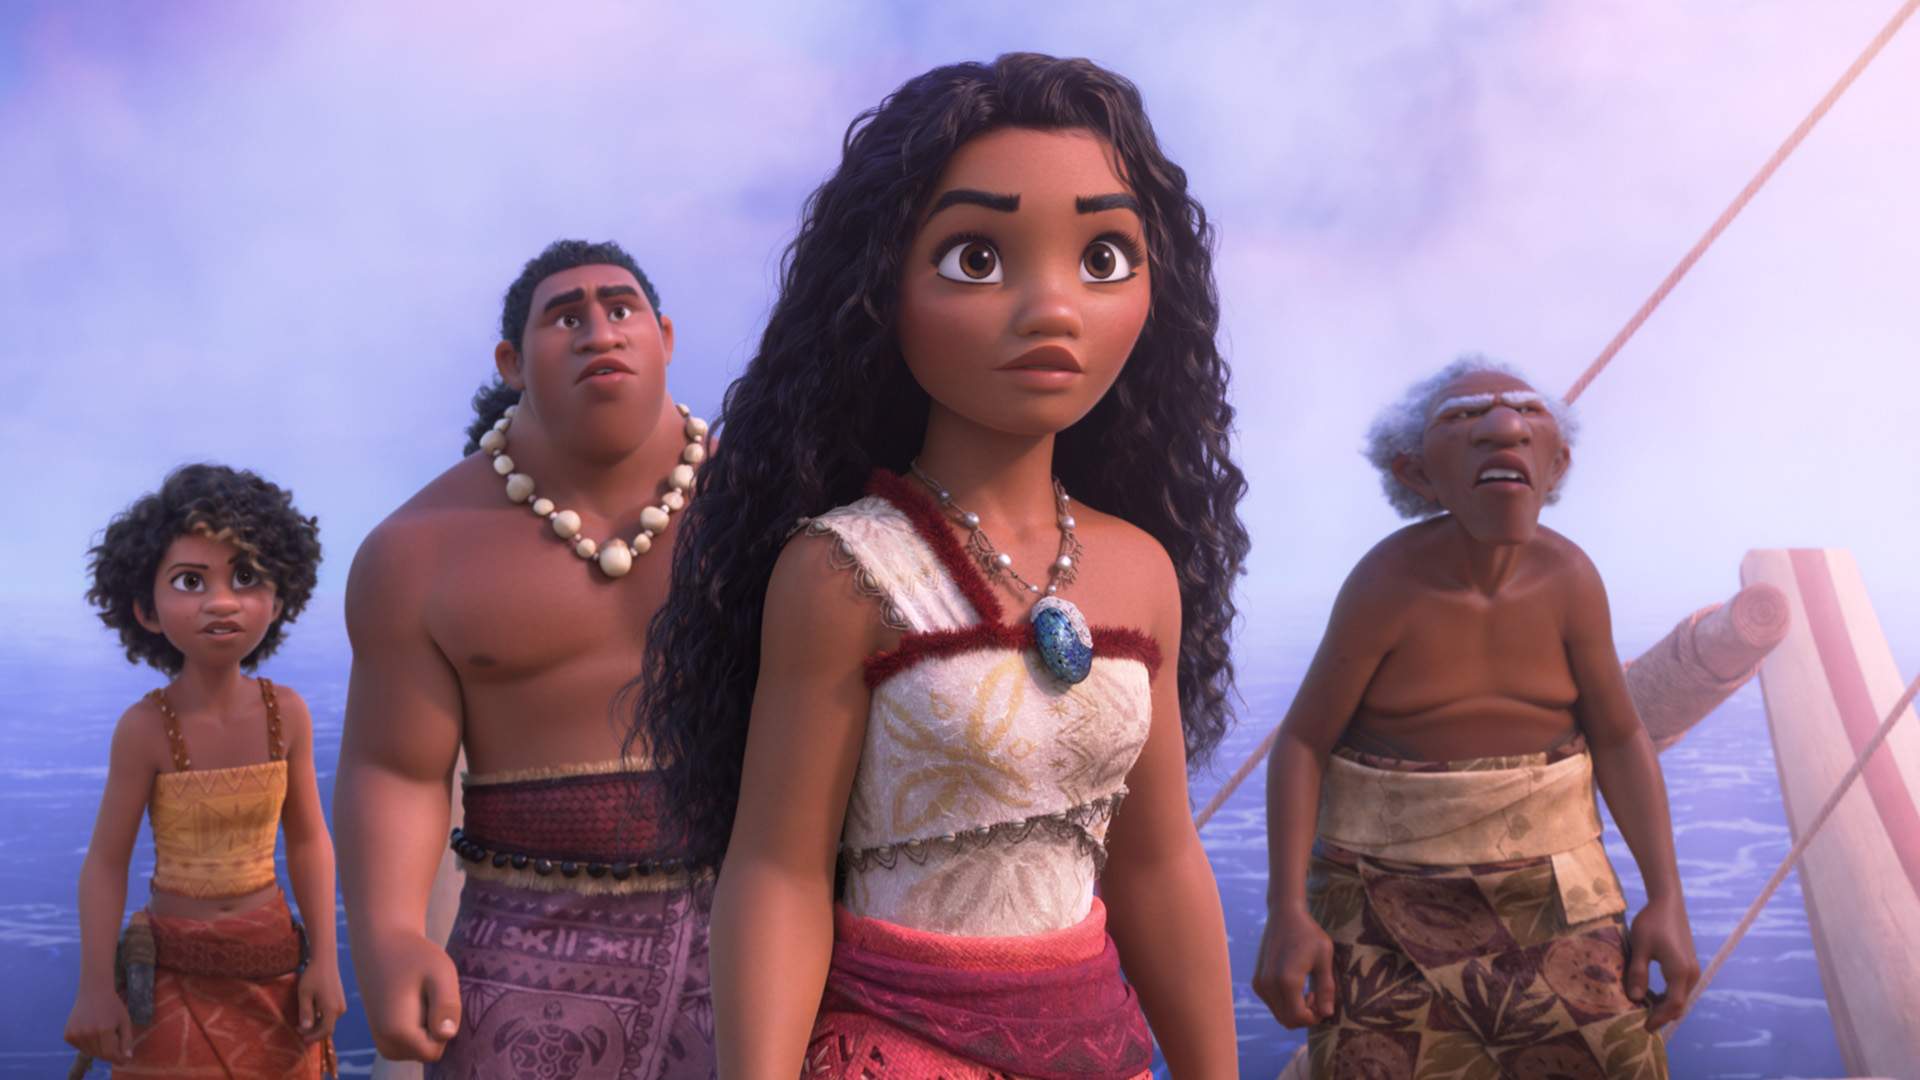 Disney's First Teaser Trailer for 'Moana 2' Sets Sail on Another Ocean Adventure with Familiar Voices